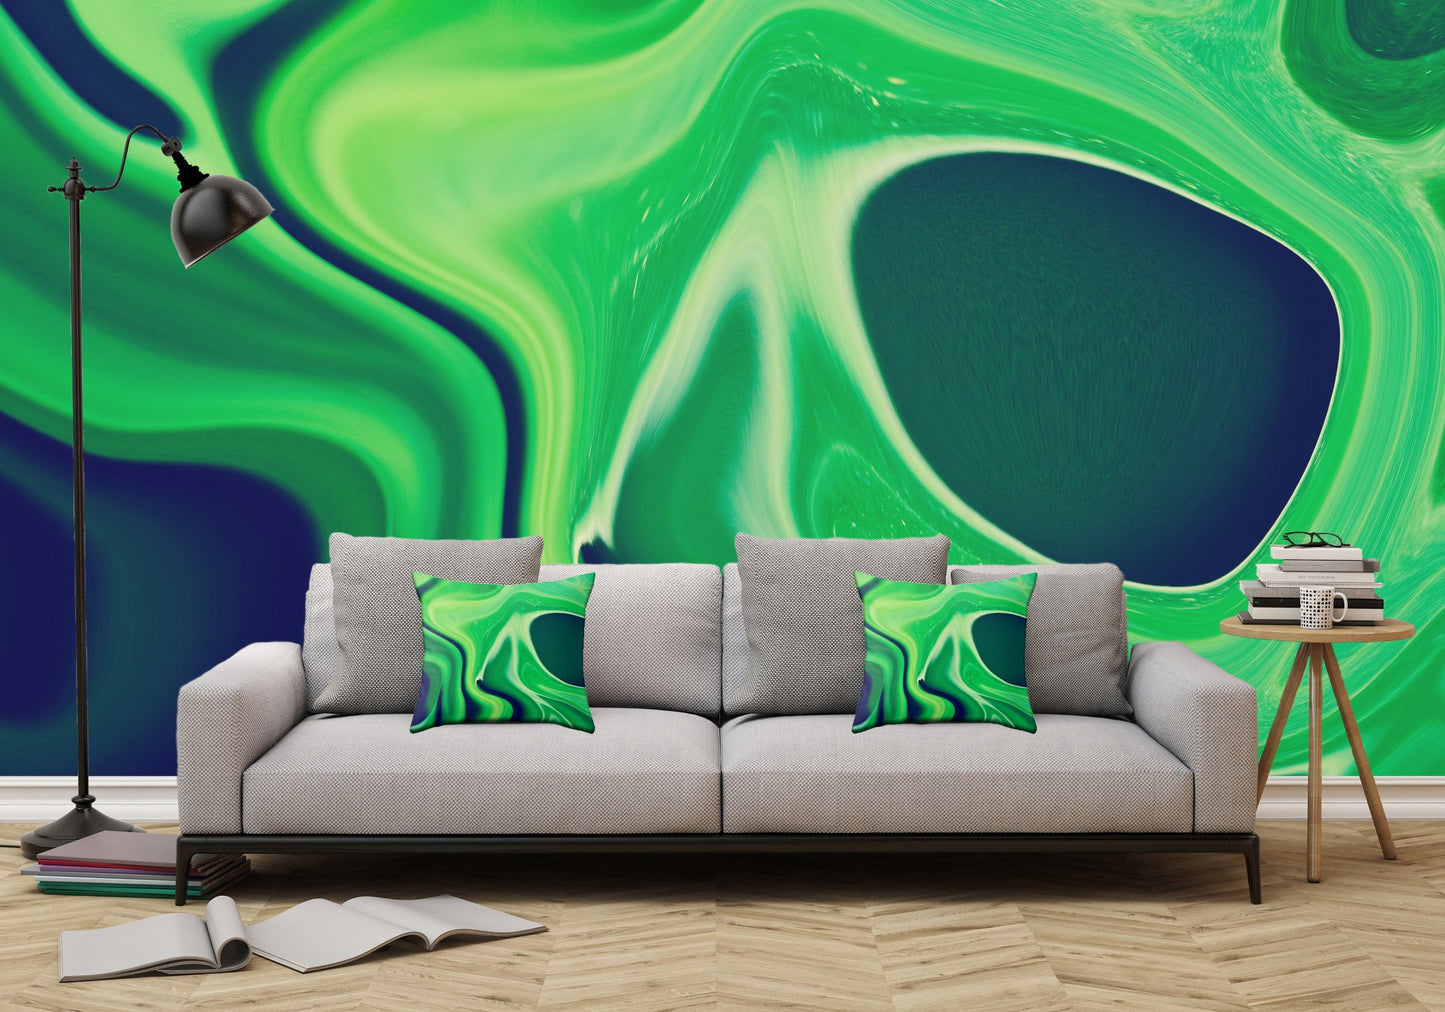 Harmonious Greens Abstract Digital Fluid Artwork - Adhesive Wallpaper - Removable Wallpaper - Wall Sticker - Full Size Wall Mural  - PIPAFINEART